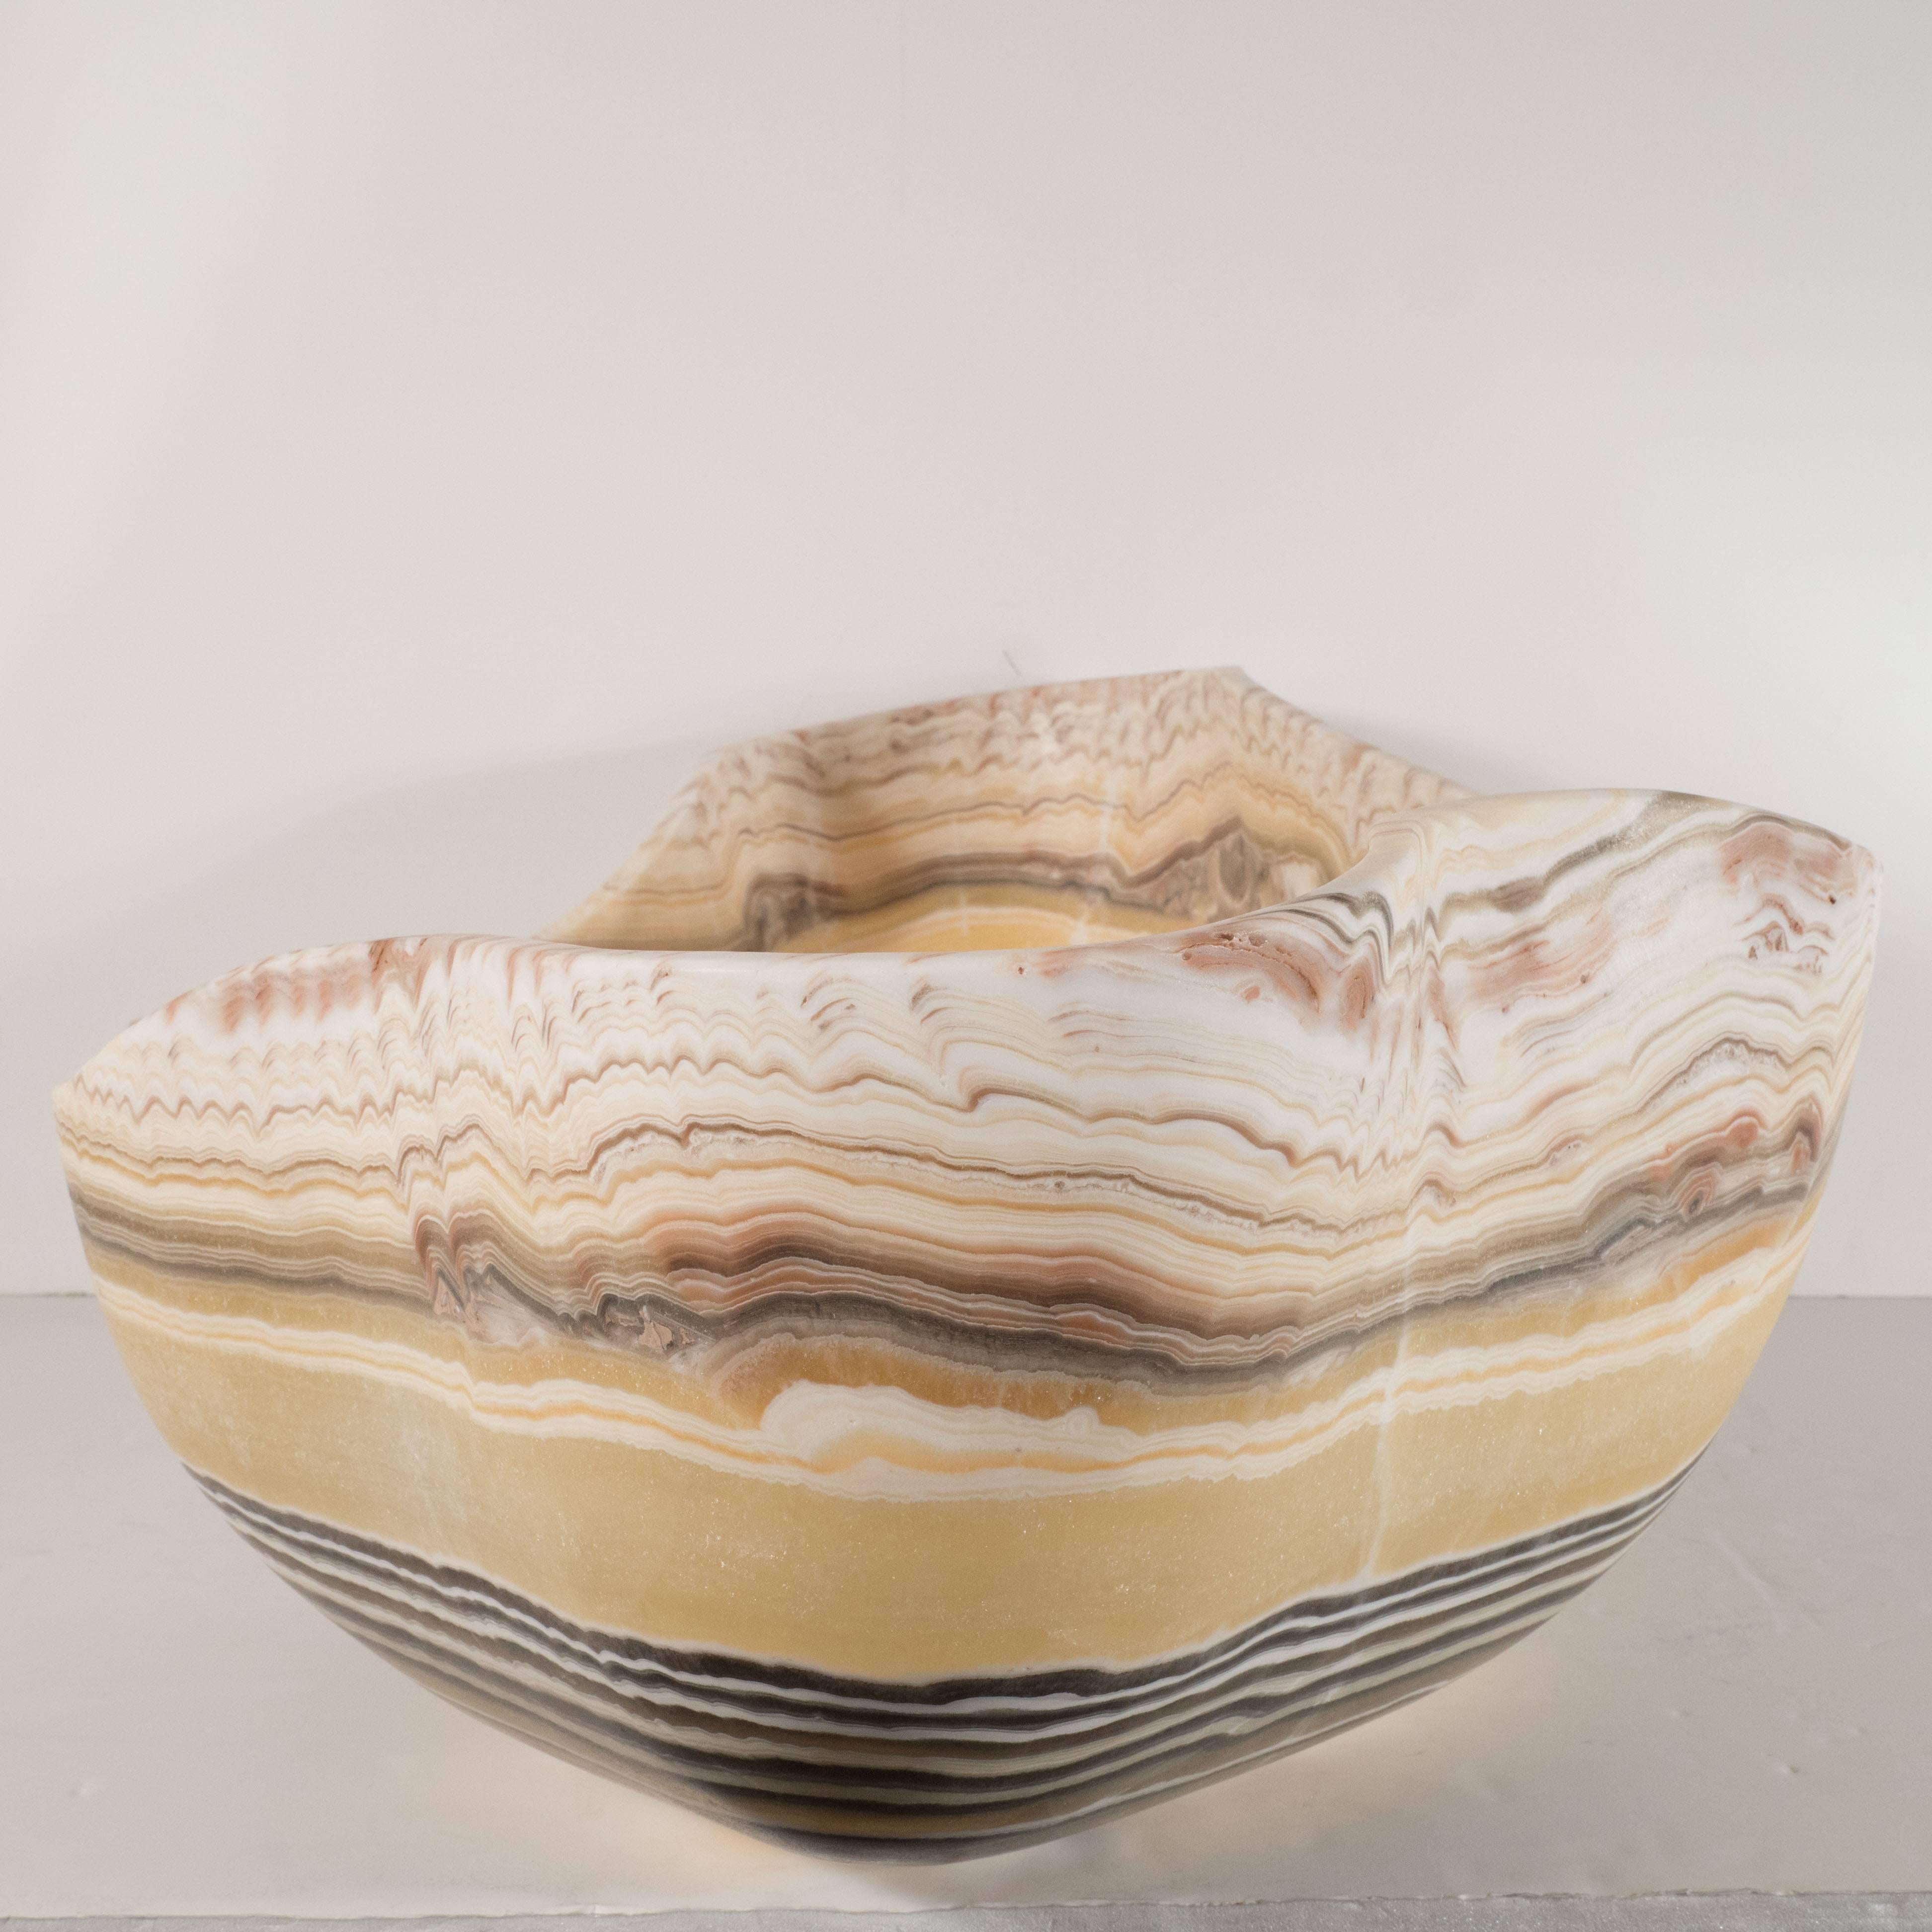 Brazilian Organic Modern Agate Bowl with Grisaille Bands against a Honeyed Background